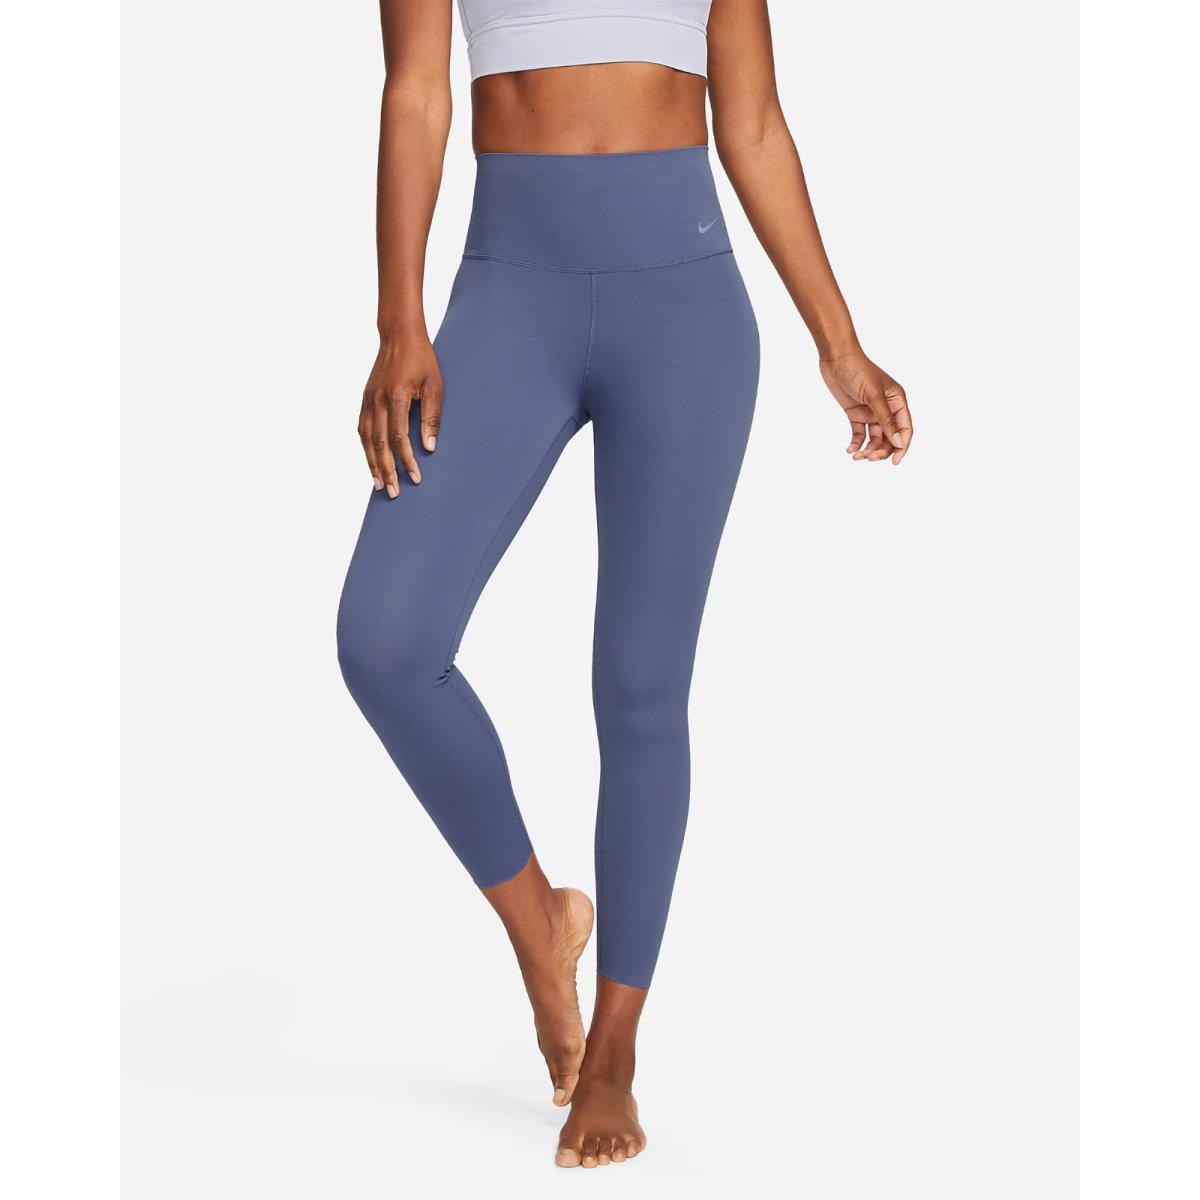 Women s Nike Zenvy Gentle-support High-waisted 7/8 Leggings S M Diffused Blue